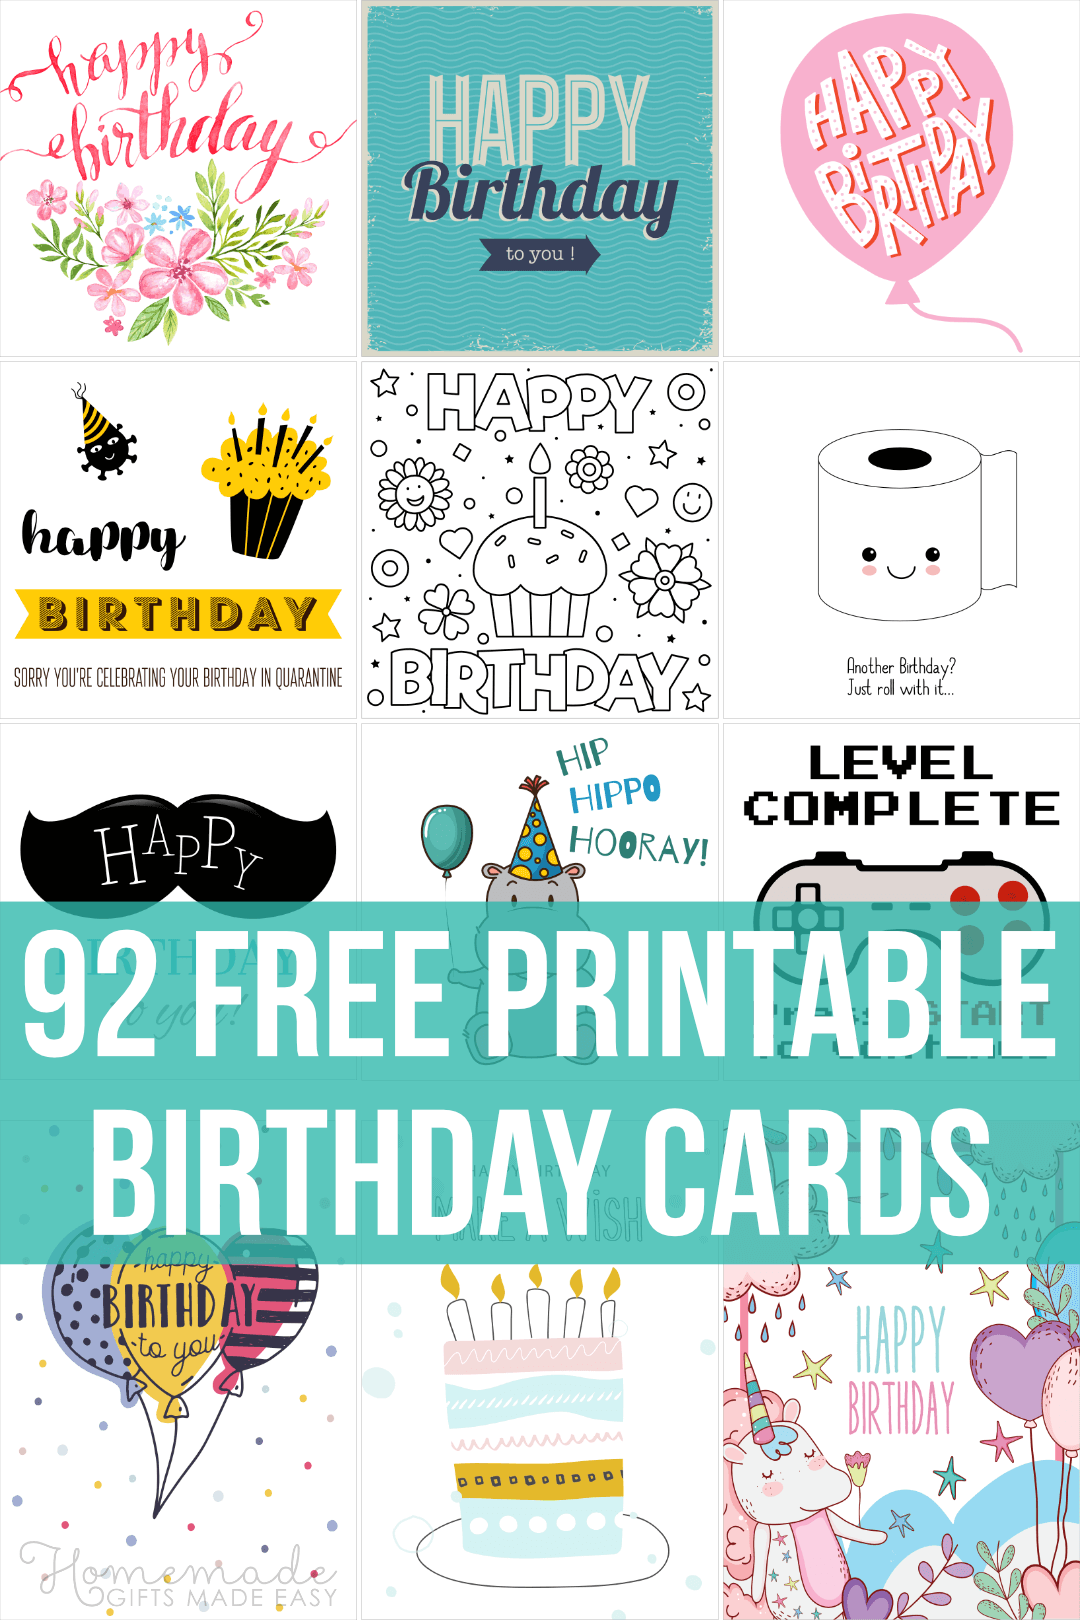 21 Free Printable Birthday Cards For Him, Her, Kids and Adults Pertaining To Free Templates For Cards Print